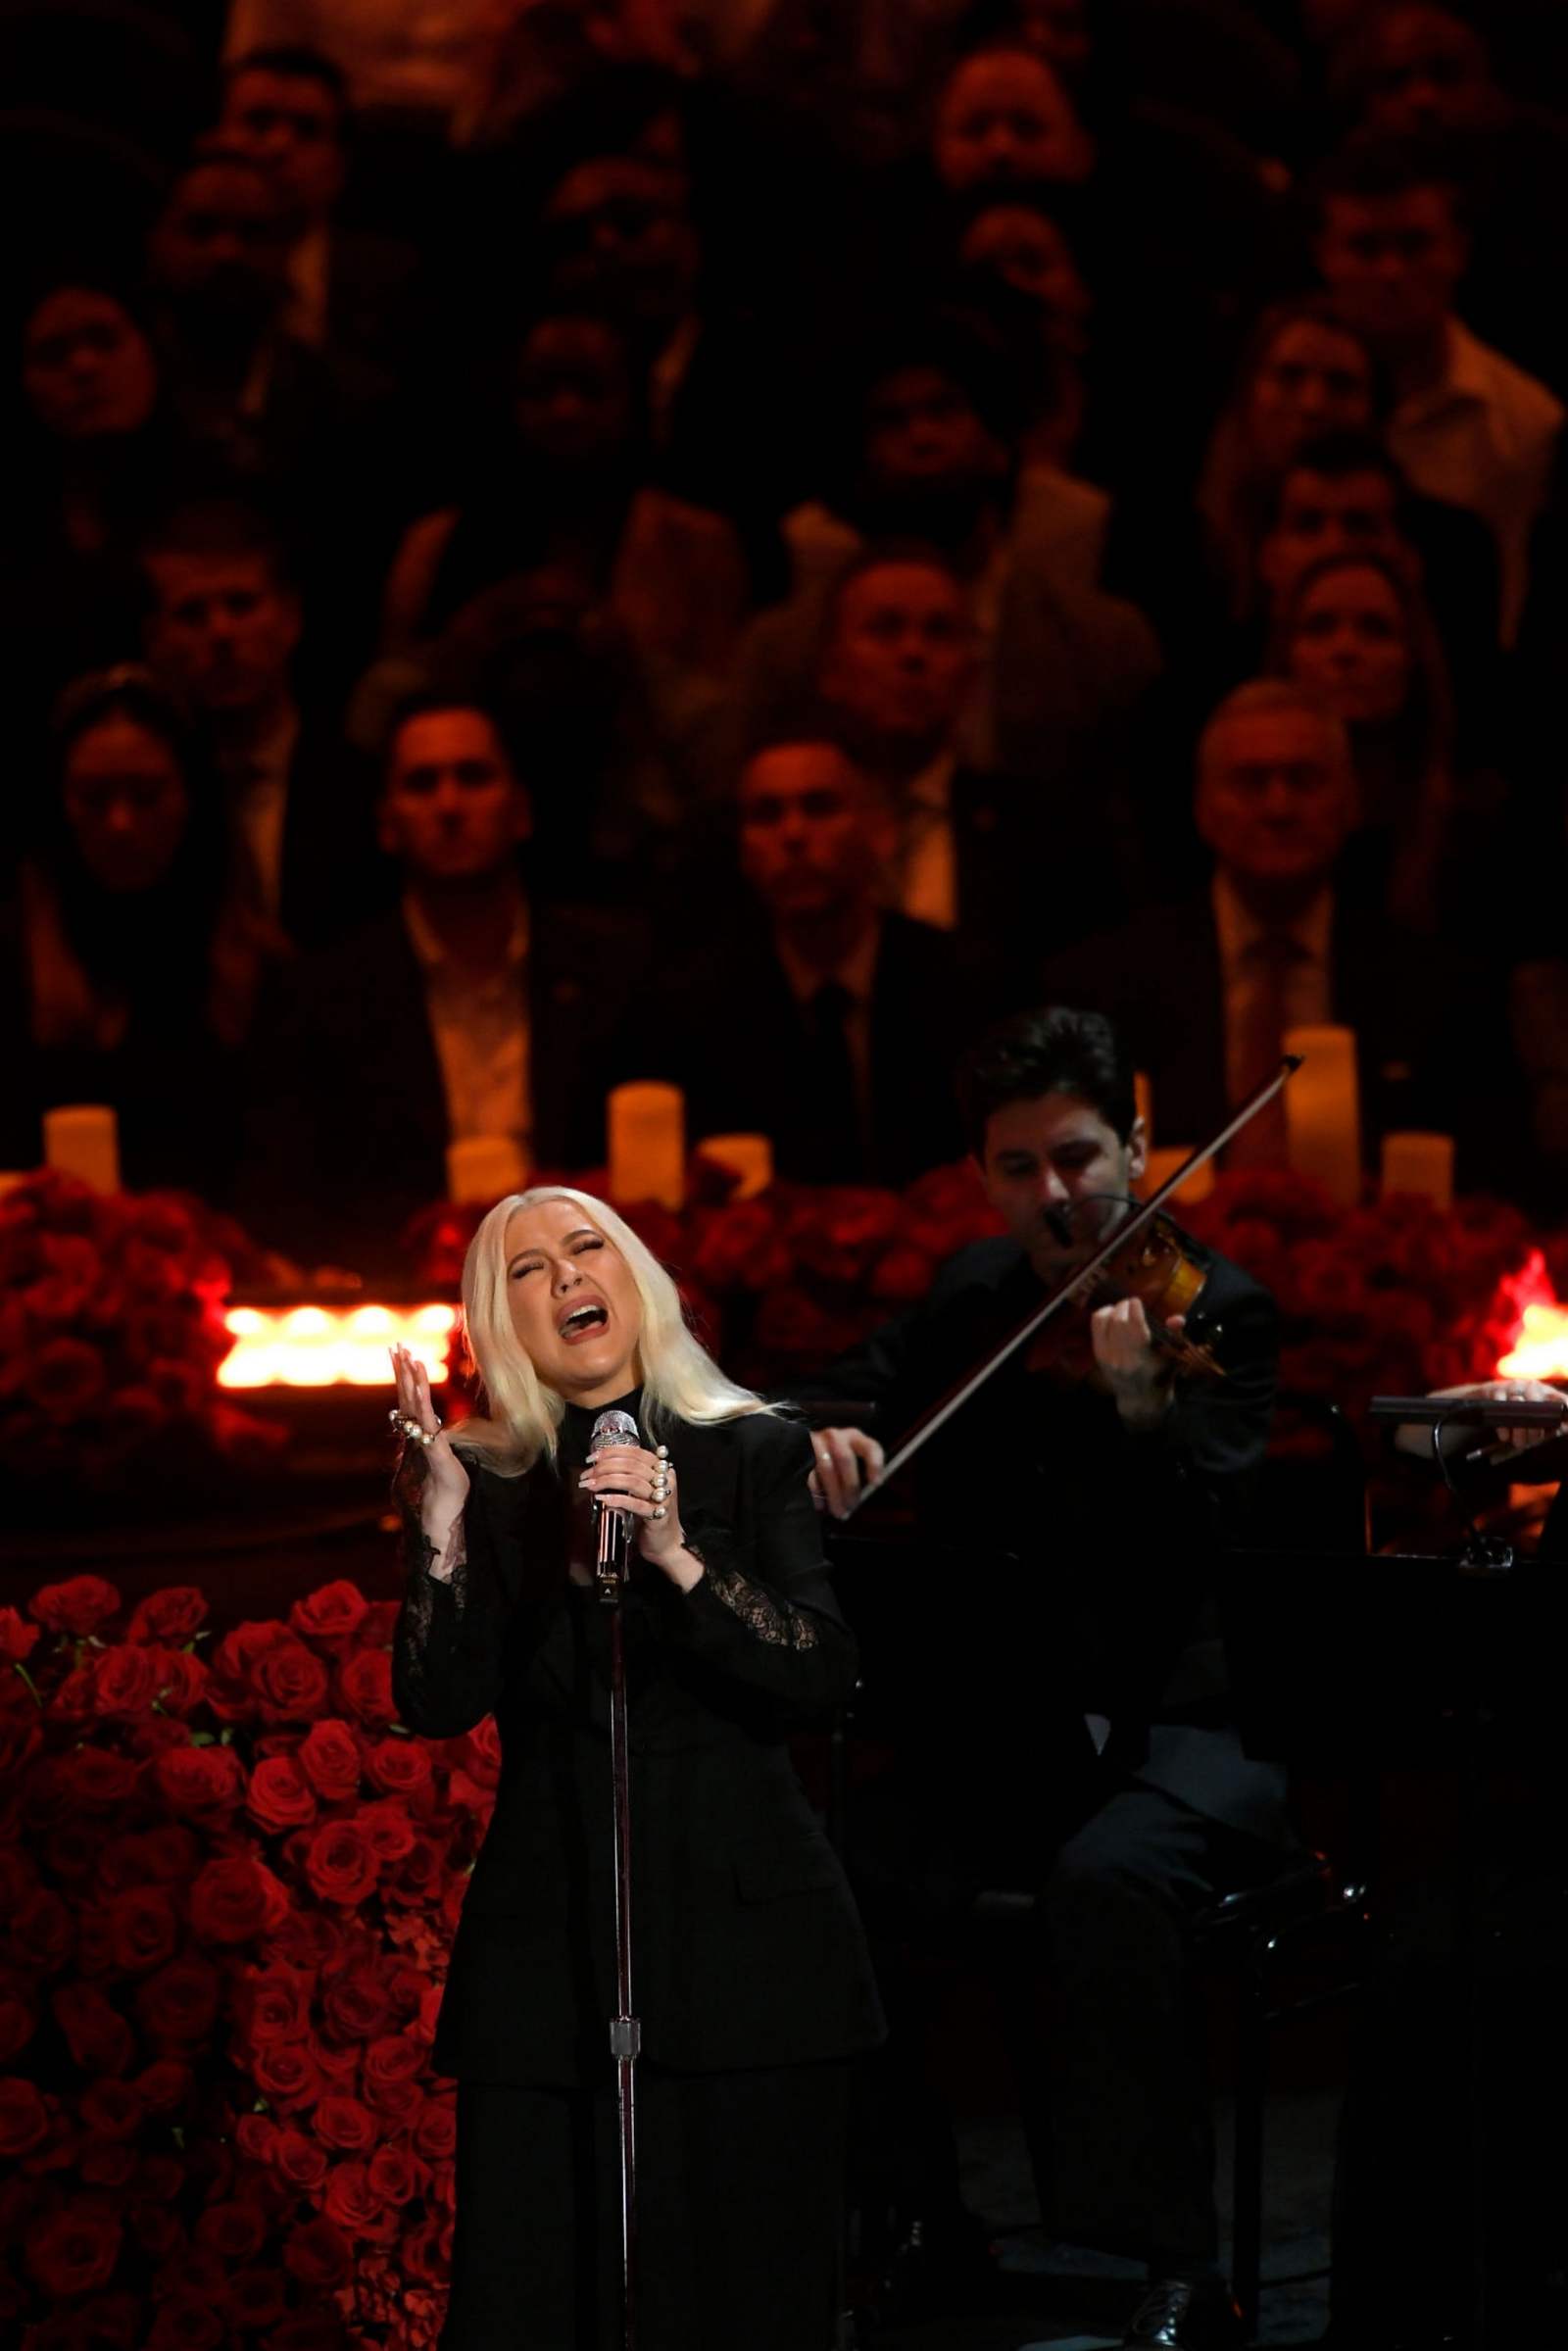 Christina_Aguilera_Performs_at_A_Celebration_of_Life_for_Kobe_and_Gianna_Bryant_-_February_24-18.jpg